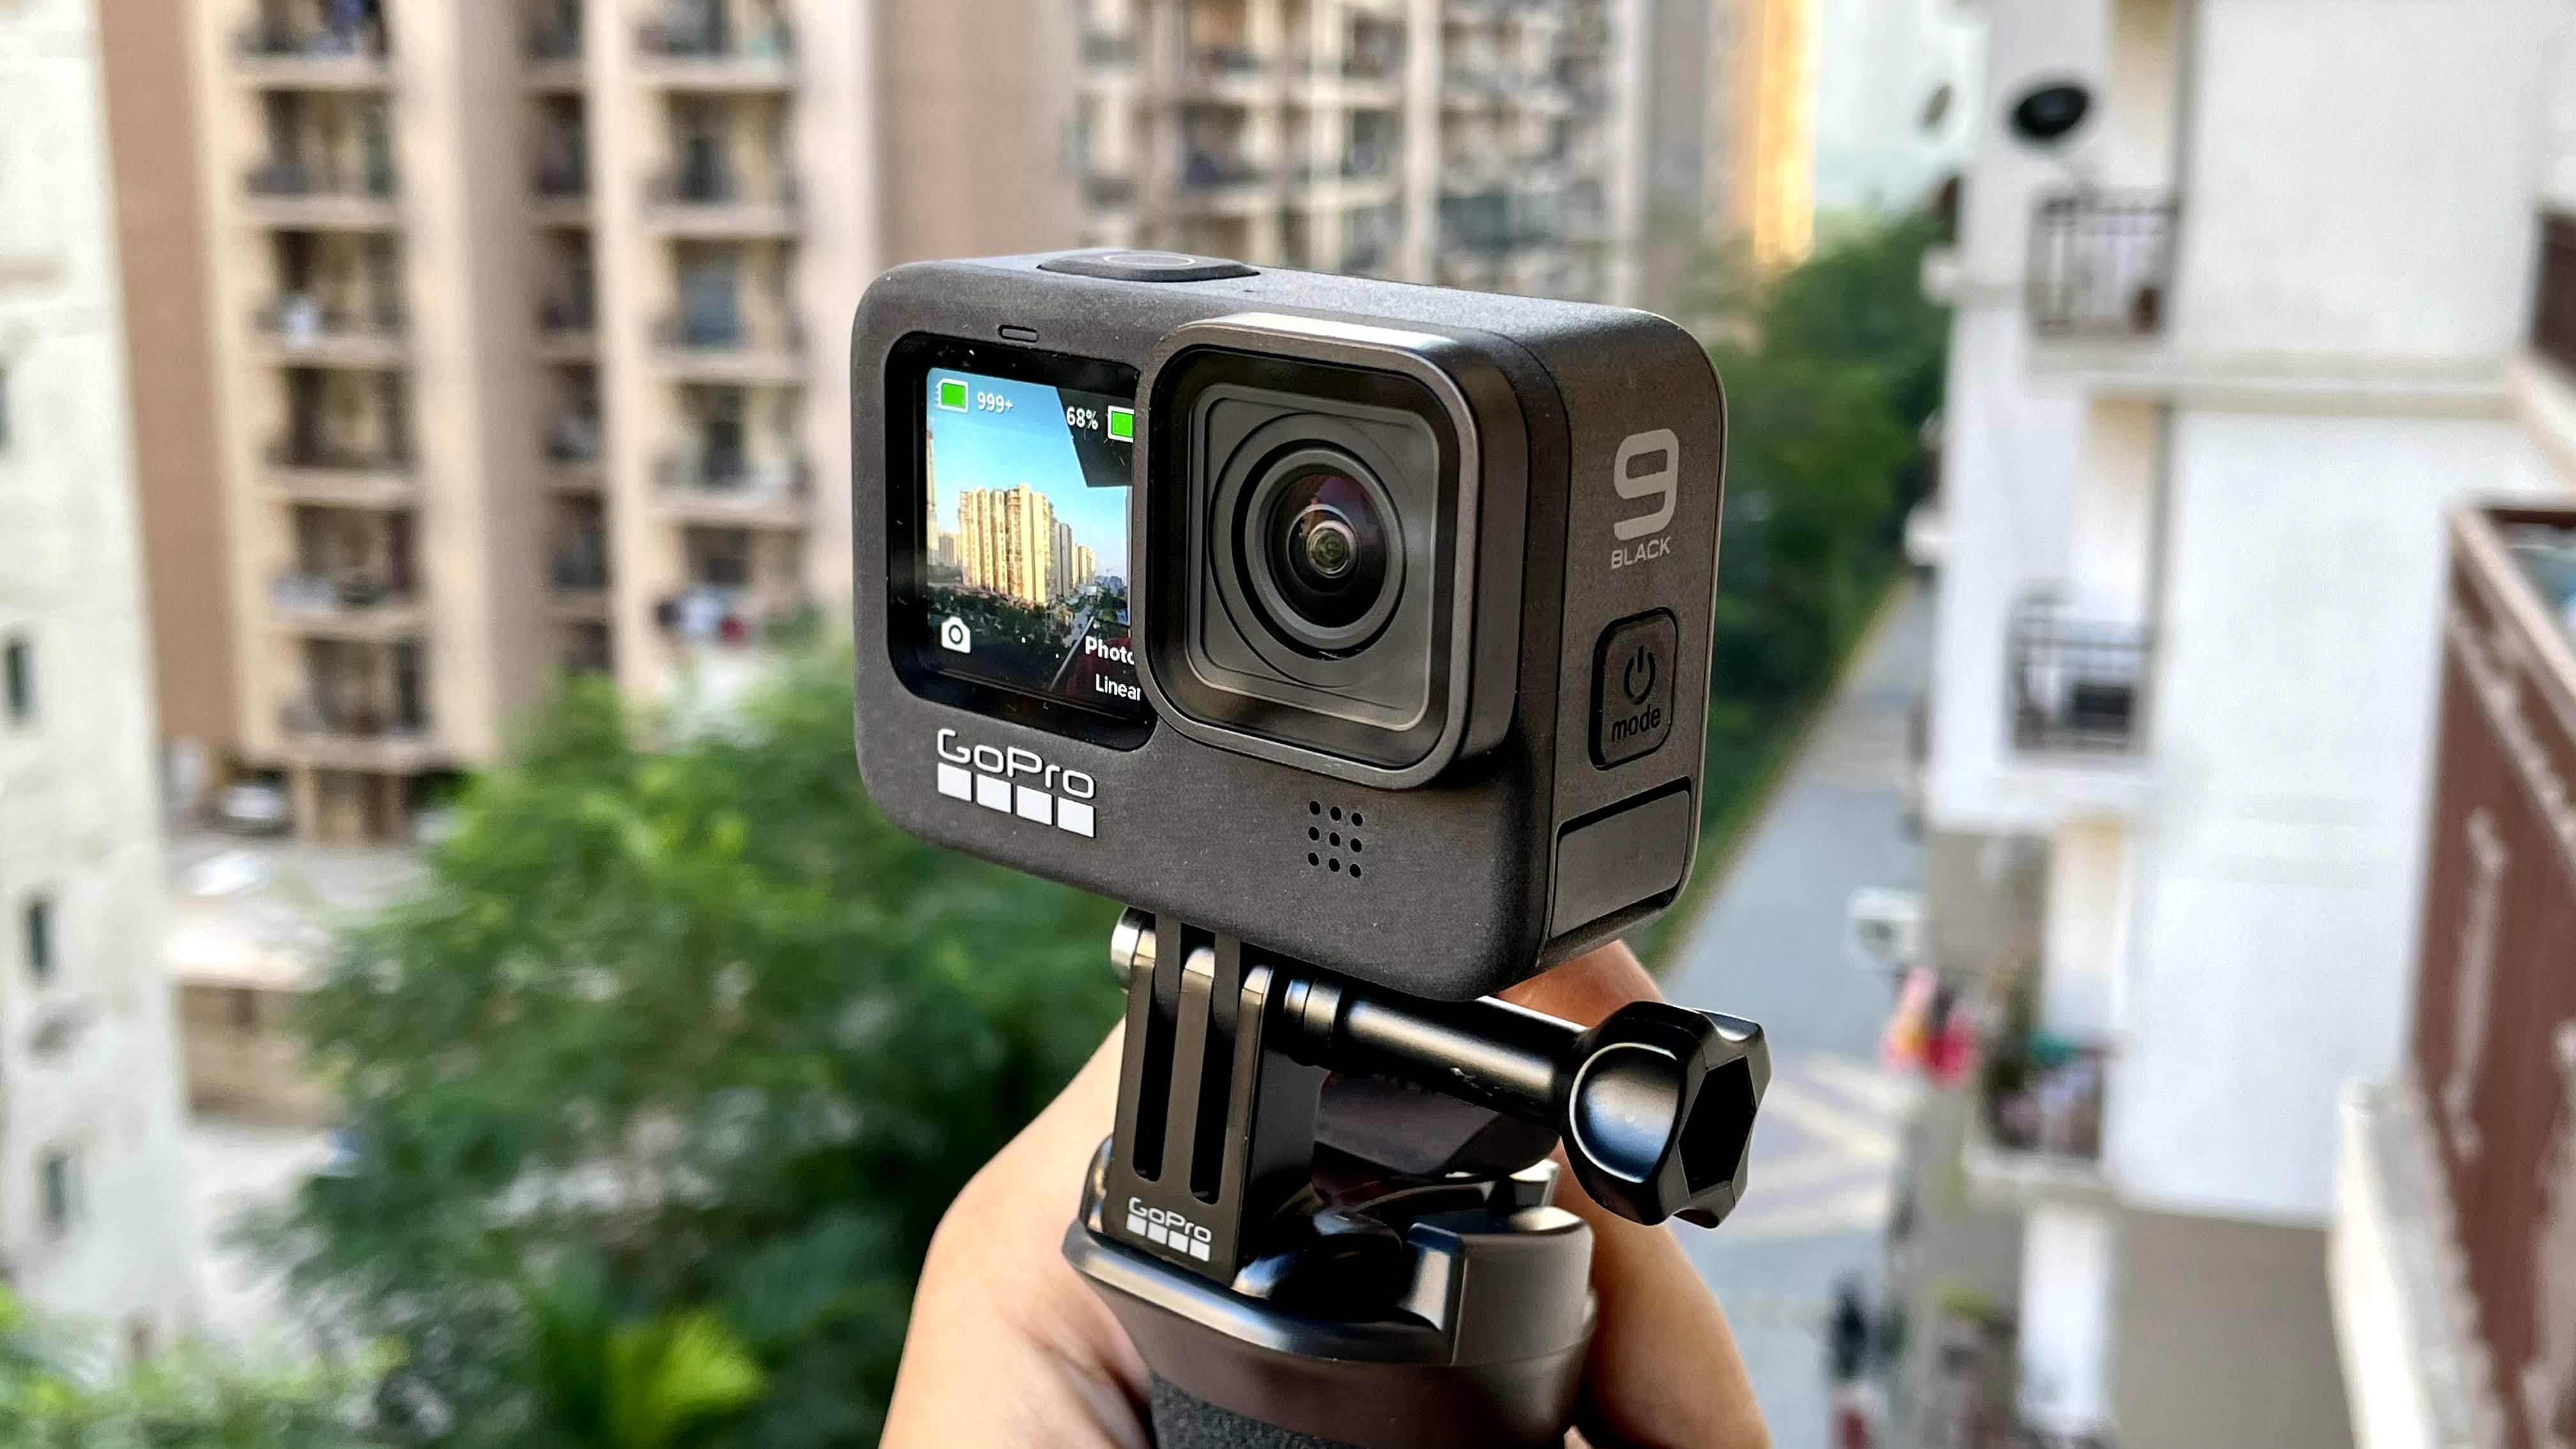 GoPro Hero 9 Black review: Action camera on steroids